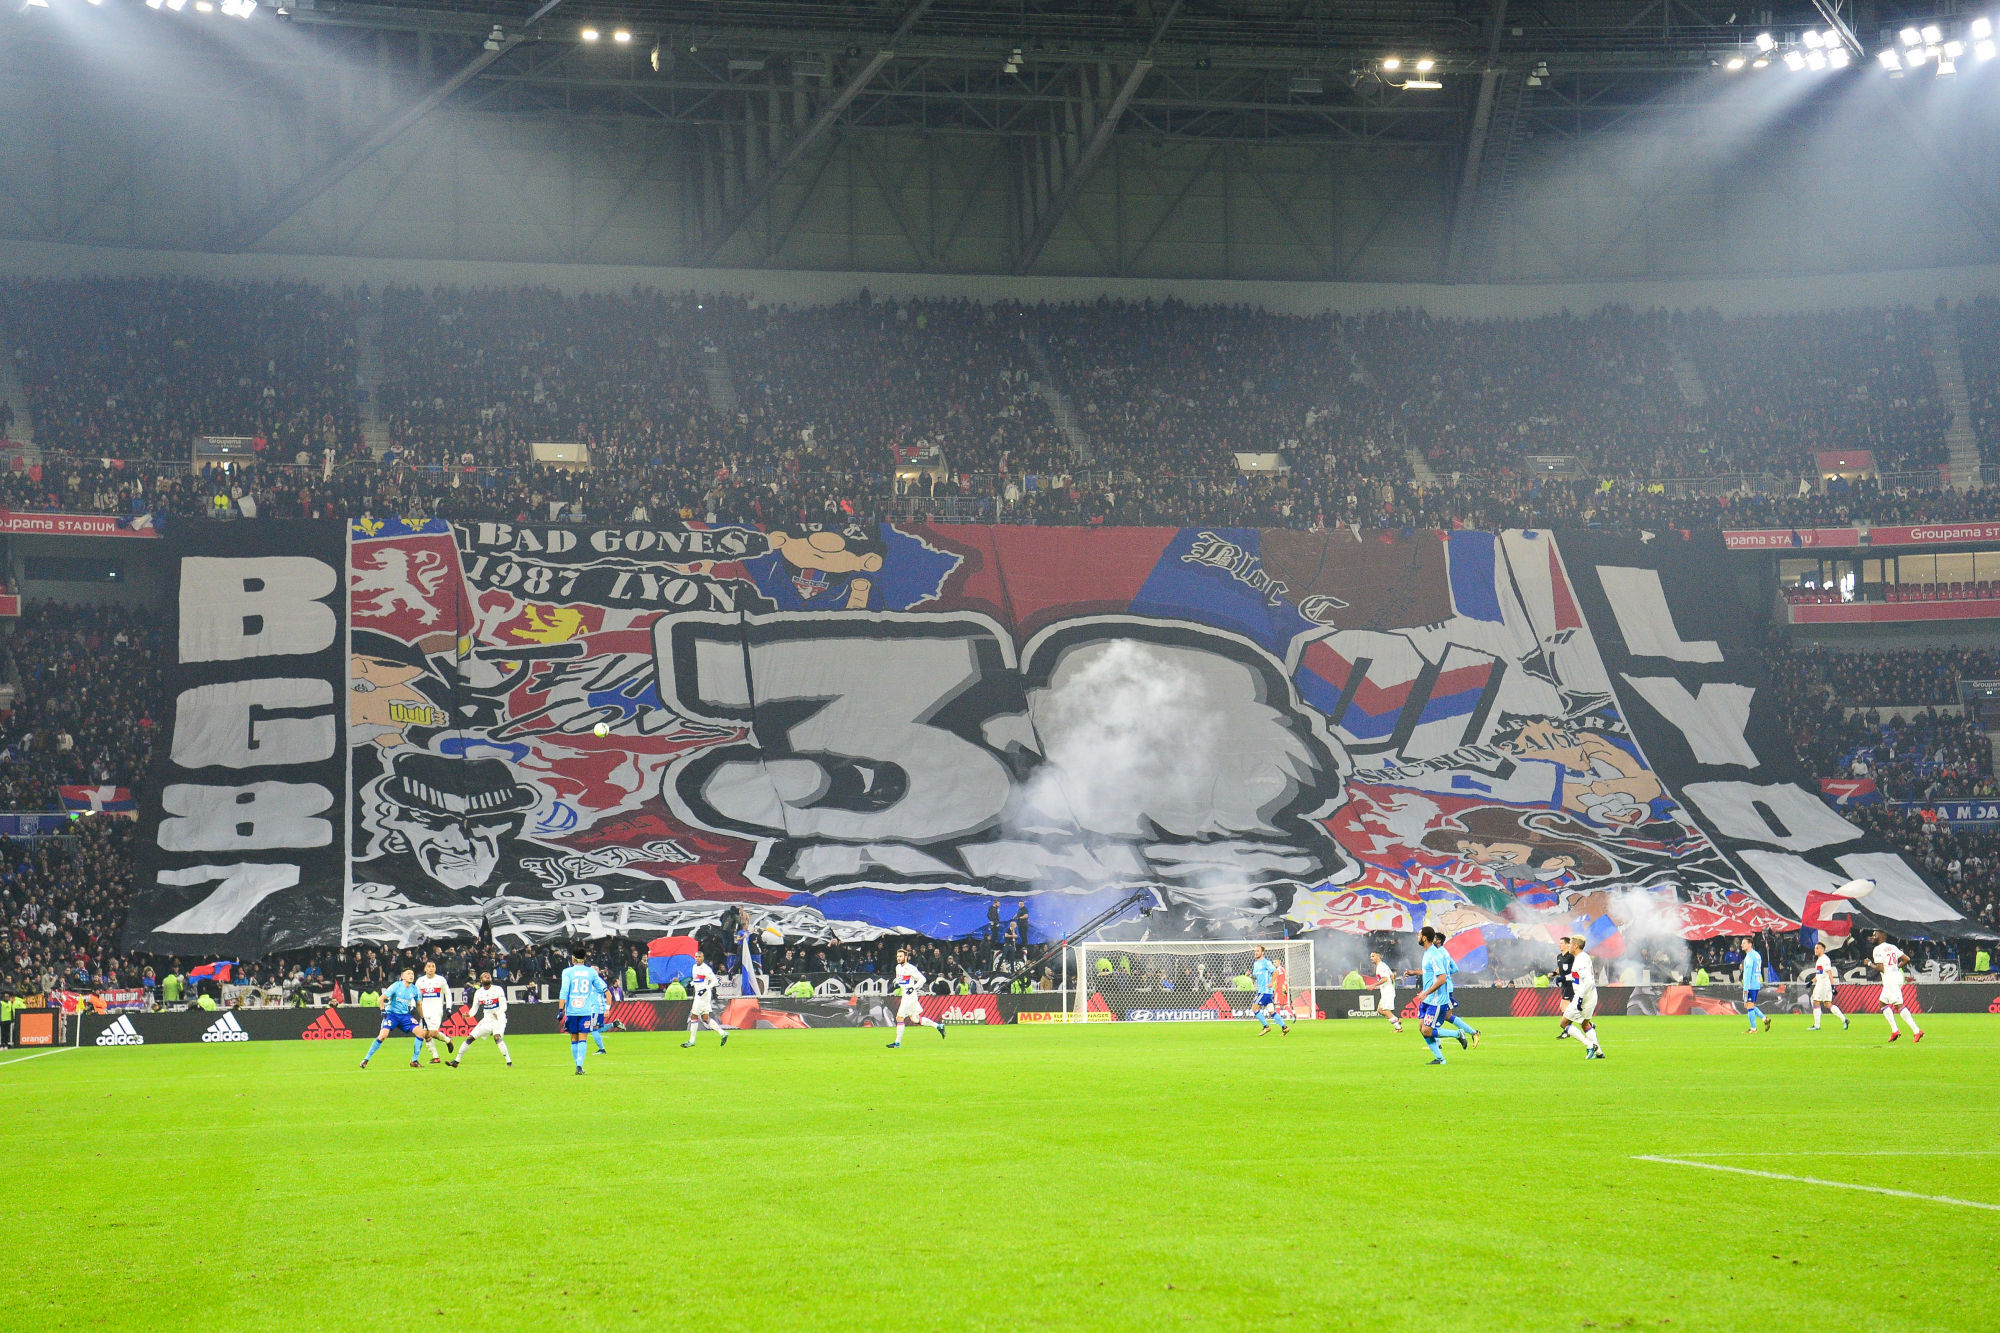 The Lyon supporters group Bad Gones celebrate their 30th anniversary during the Ligue 1 match between Olympique Lyonnais and Olympique Marseille at Parc Olympique on December 17, 2017 in Lyon, France. (Photo by Dave Winter/Icon Sport)